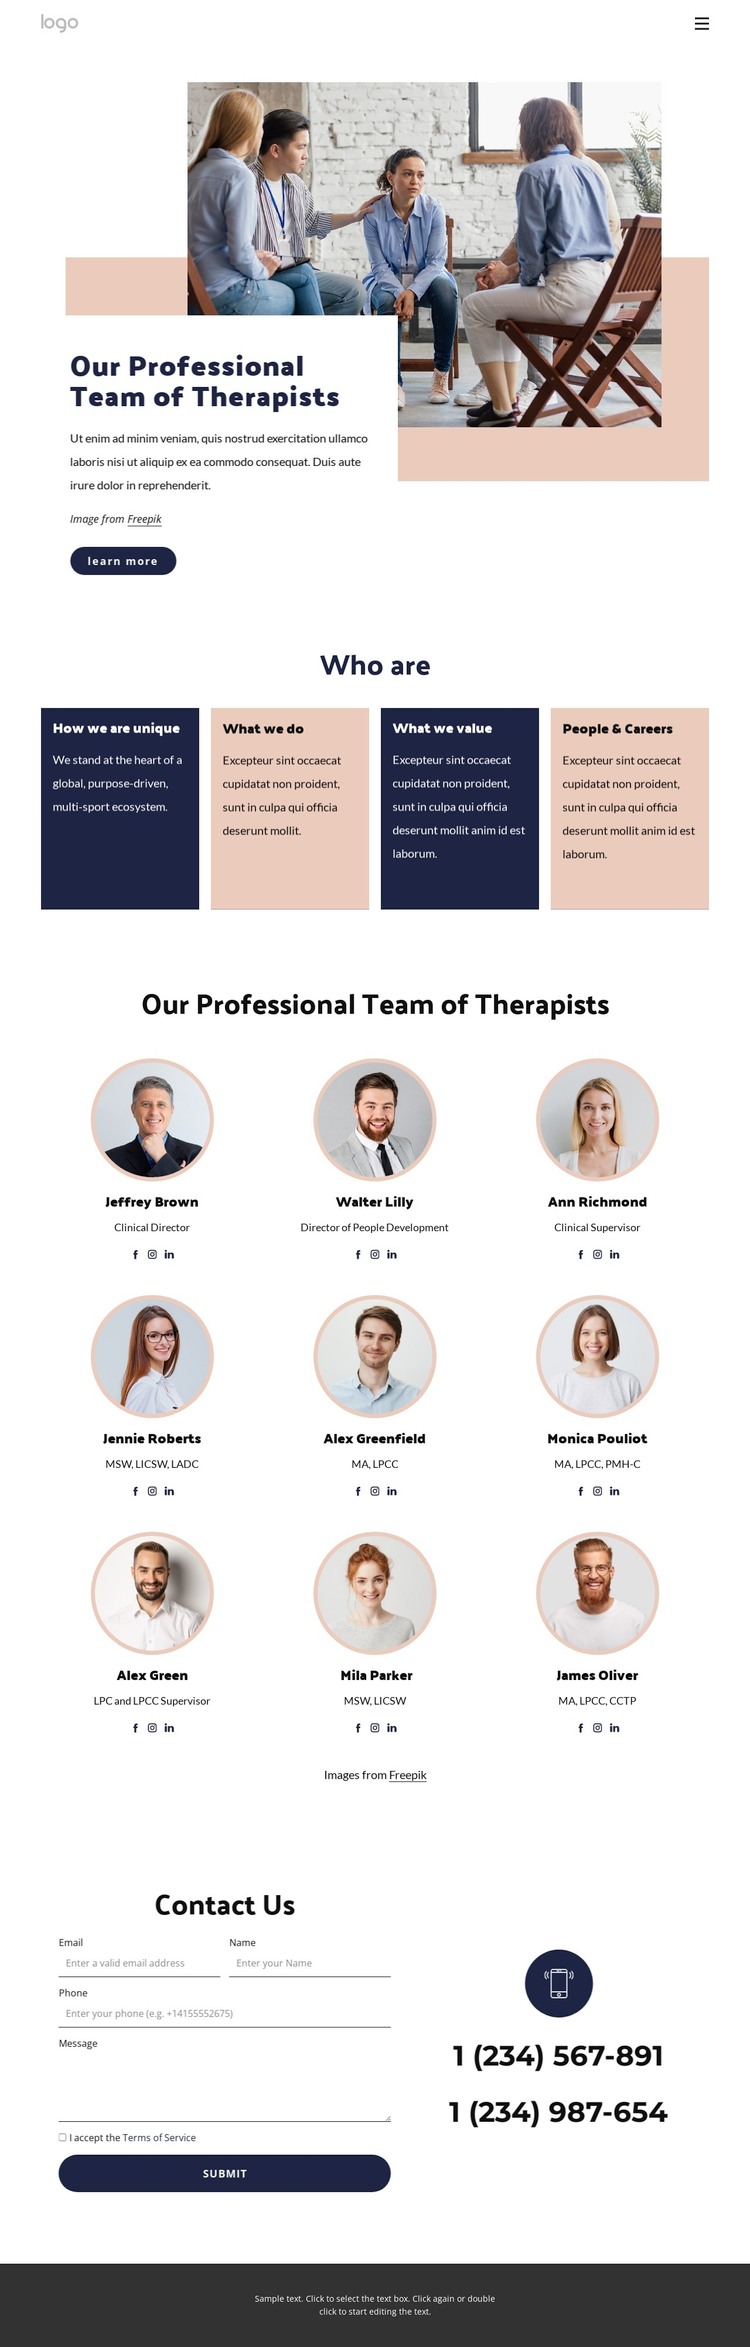 Our professional team of therapists WordPress Theme